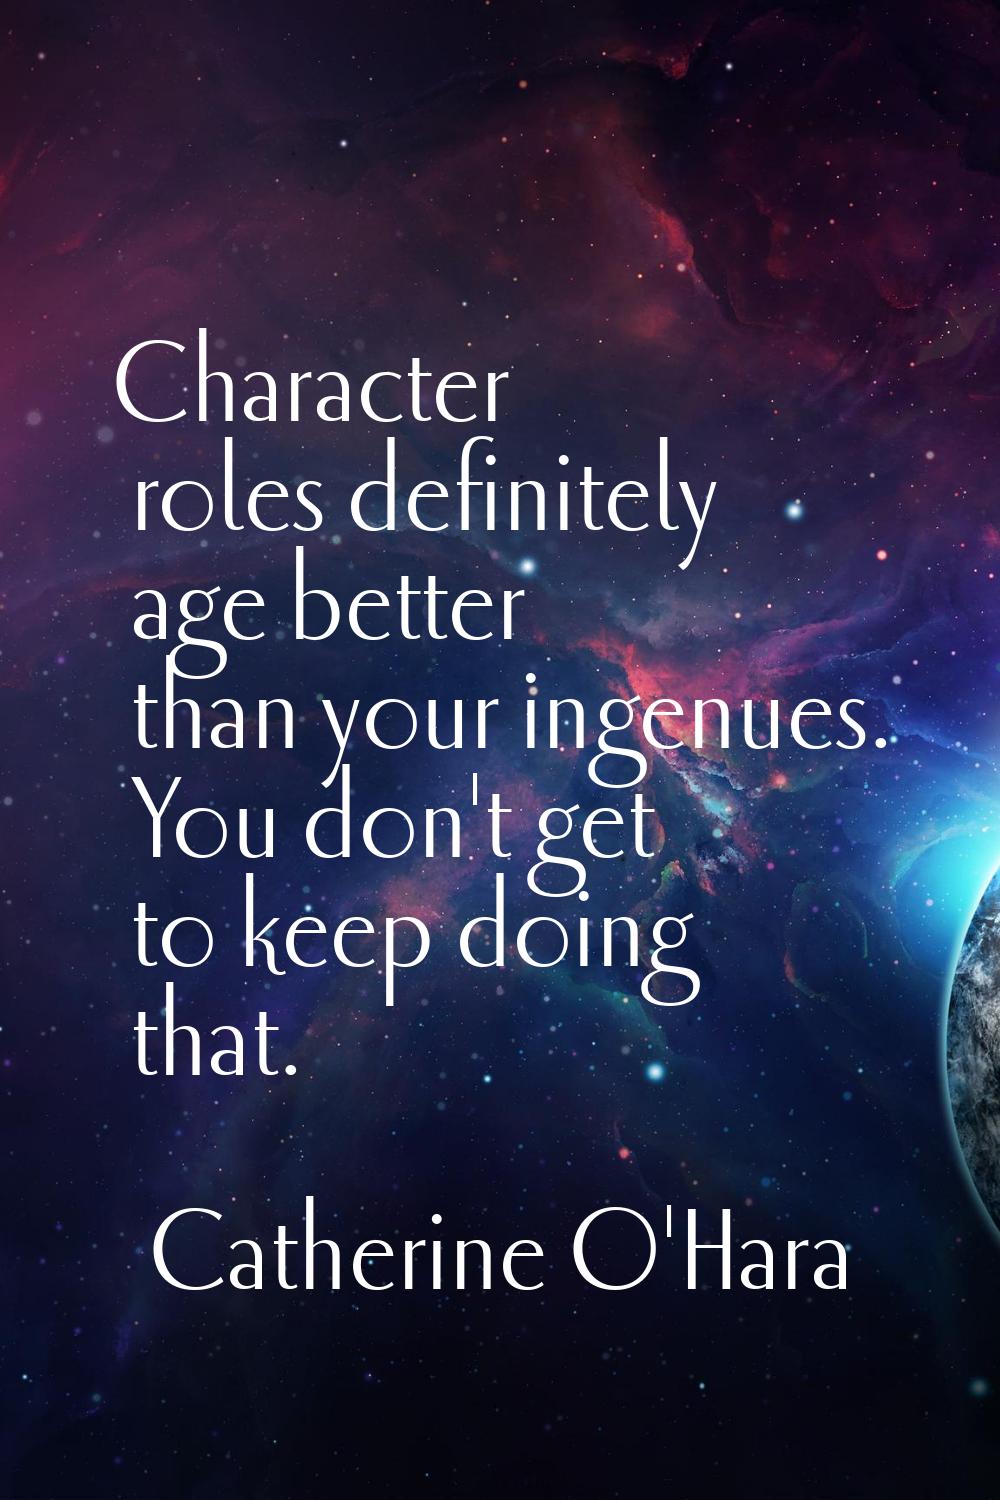 Character roles definitely age better than your ingenues. You don't get to keep doing that.